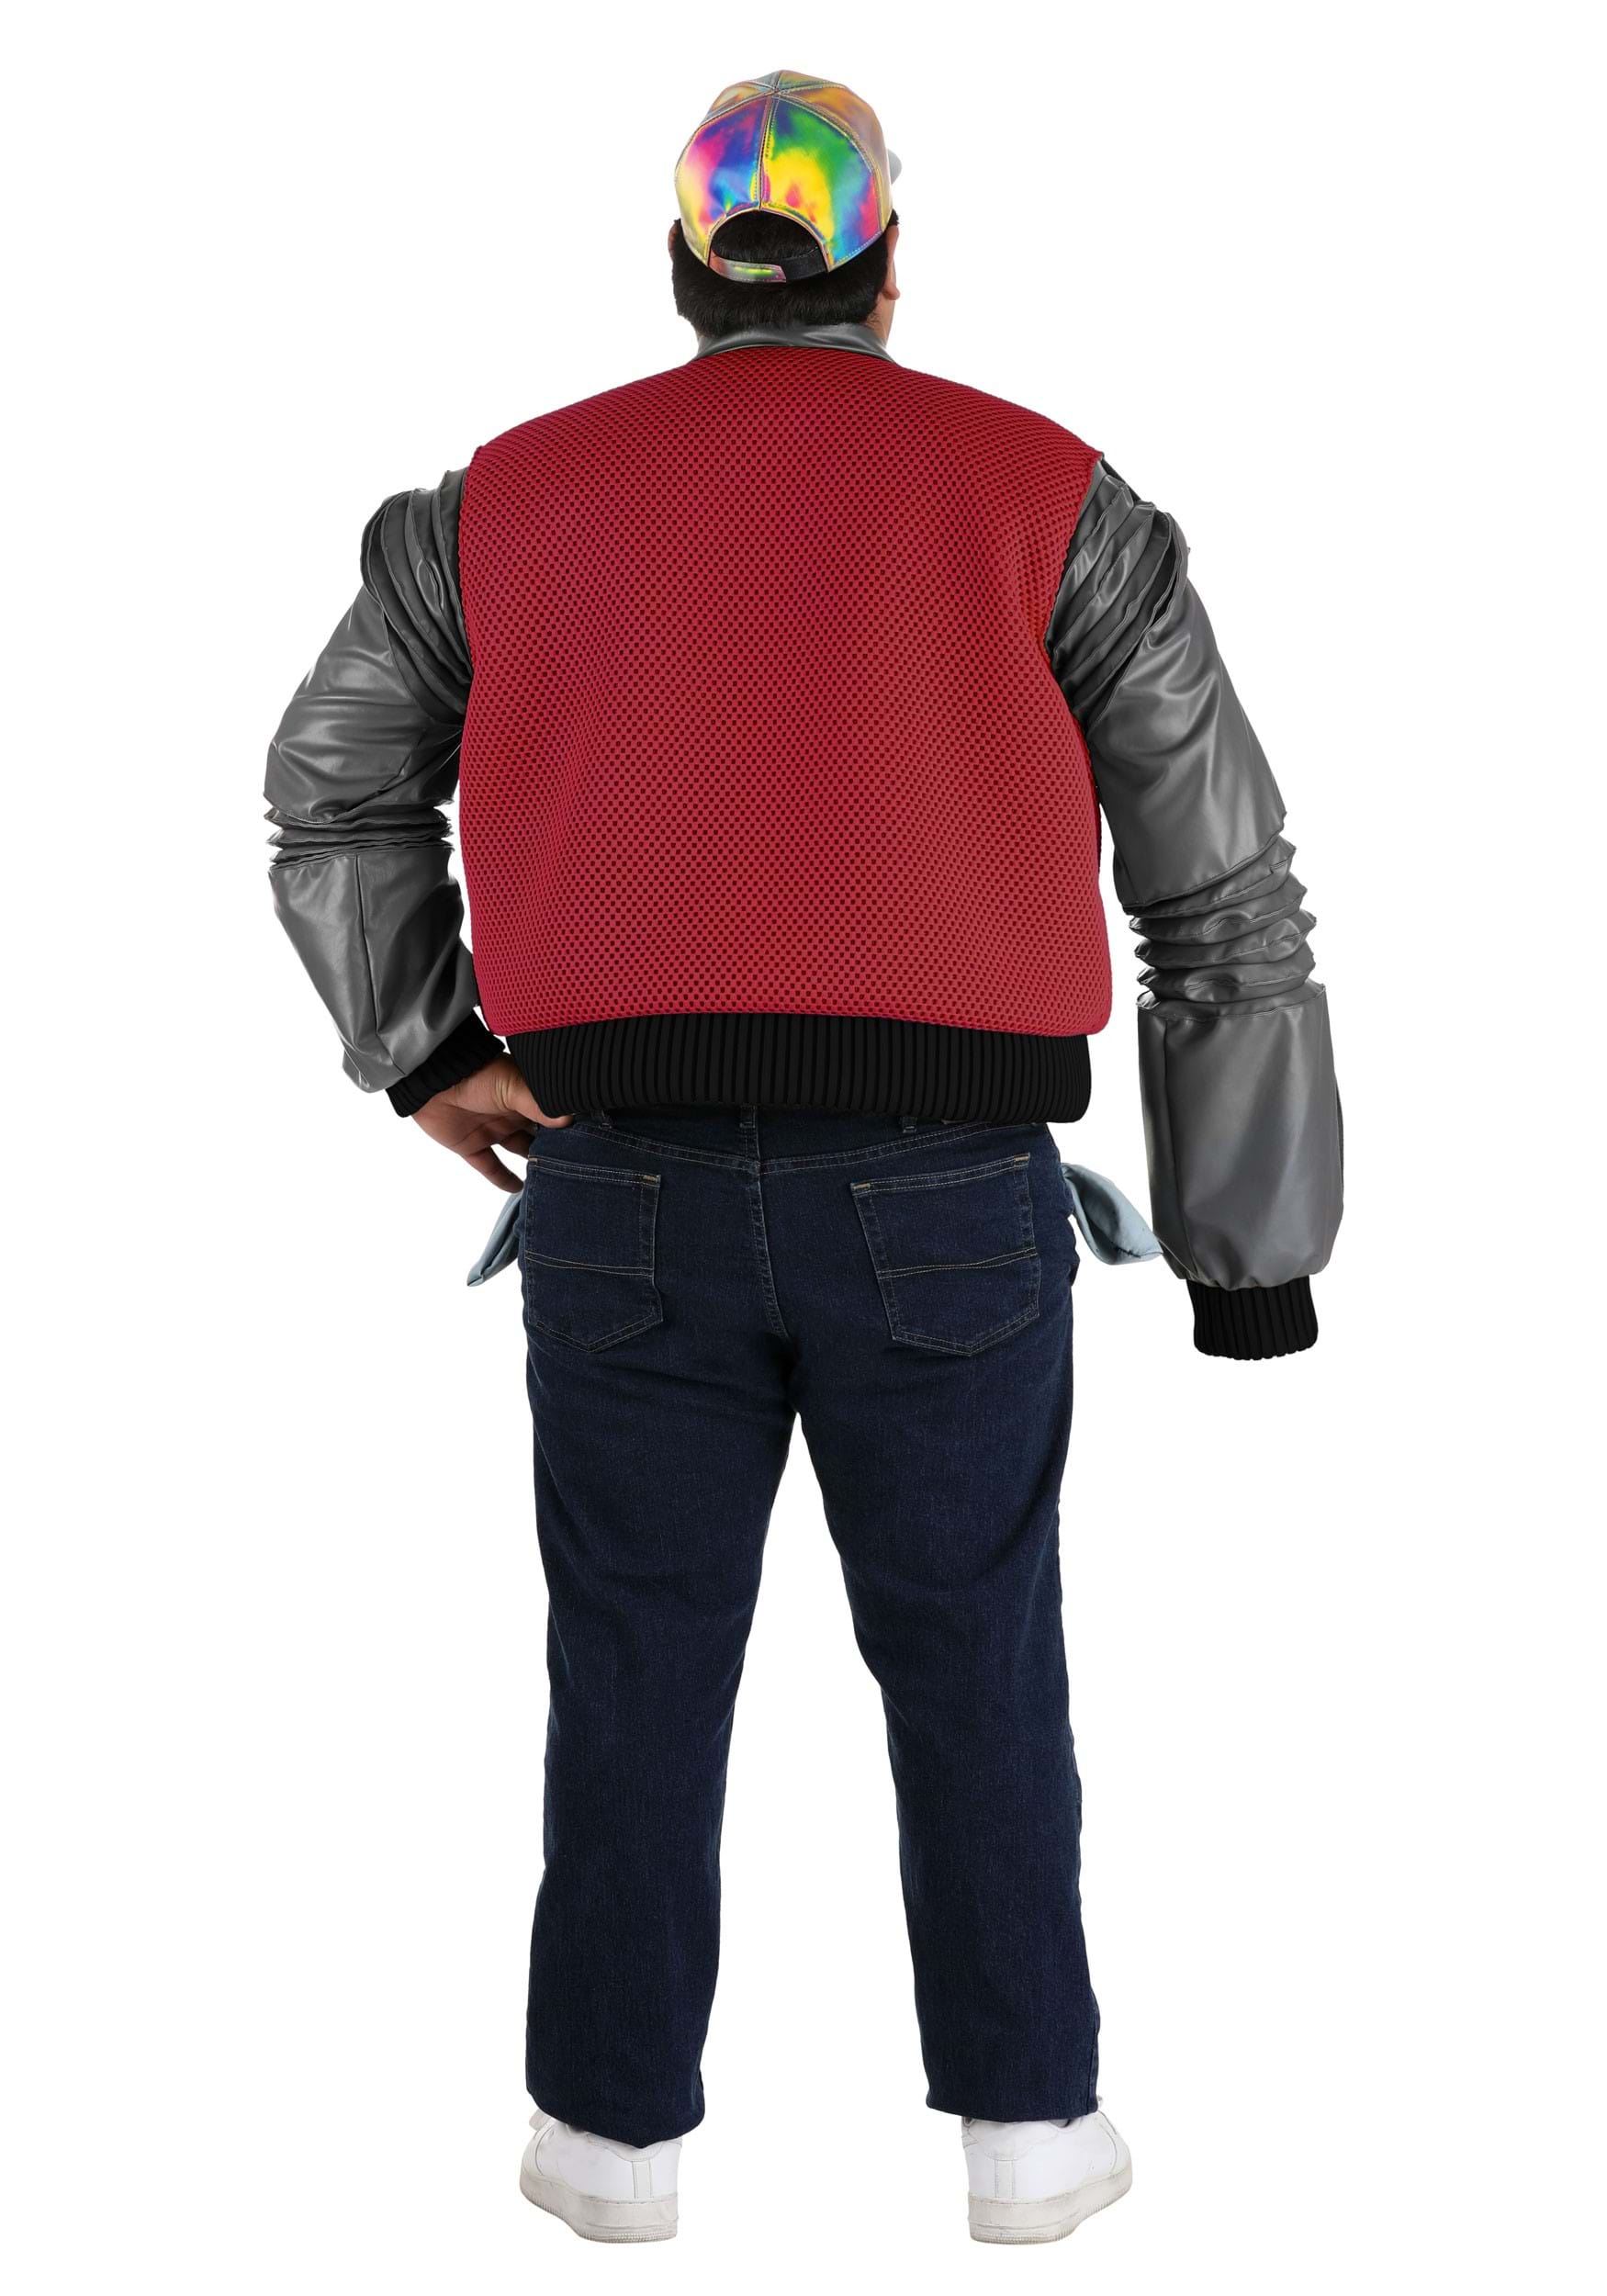 Plus Size Men's Authentic Marty McFly Jacket Costume From Back To The Future